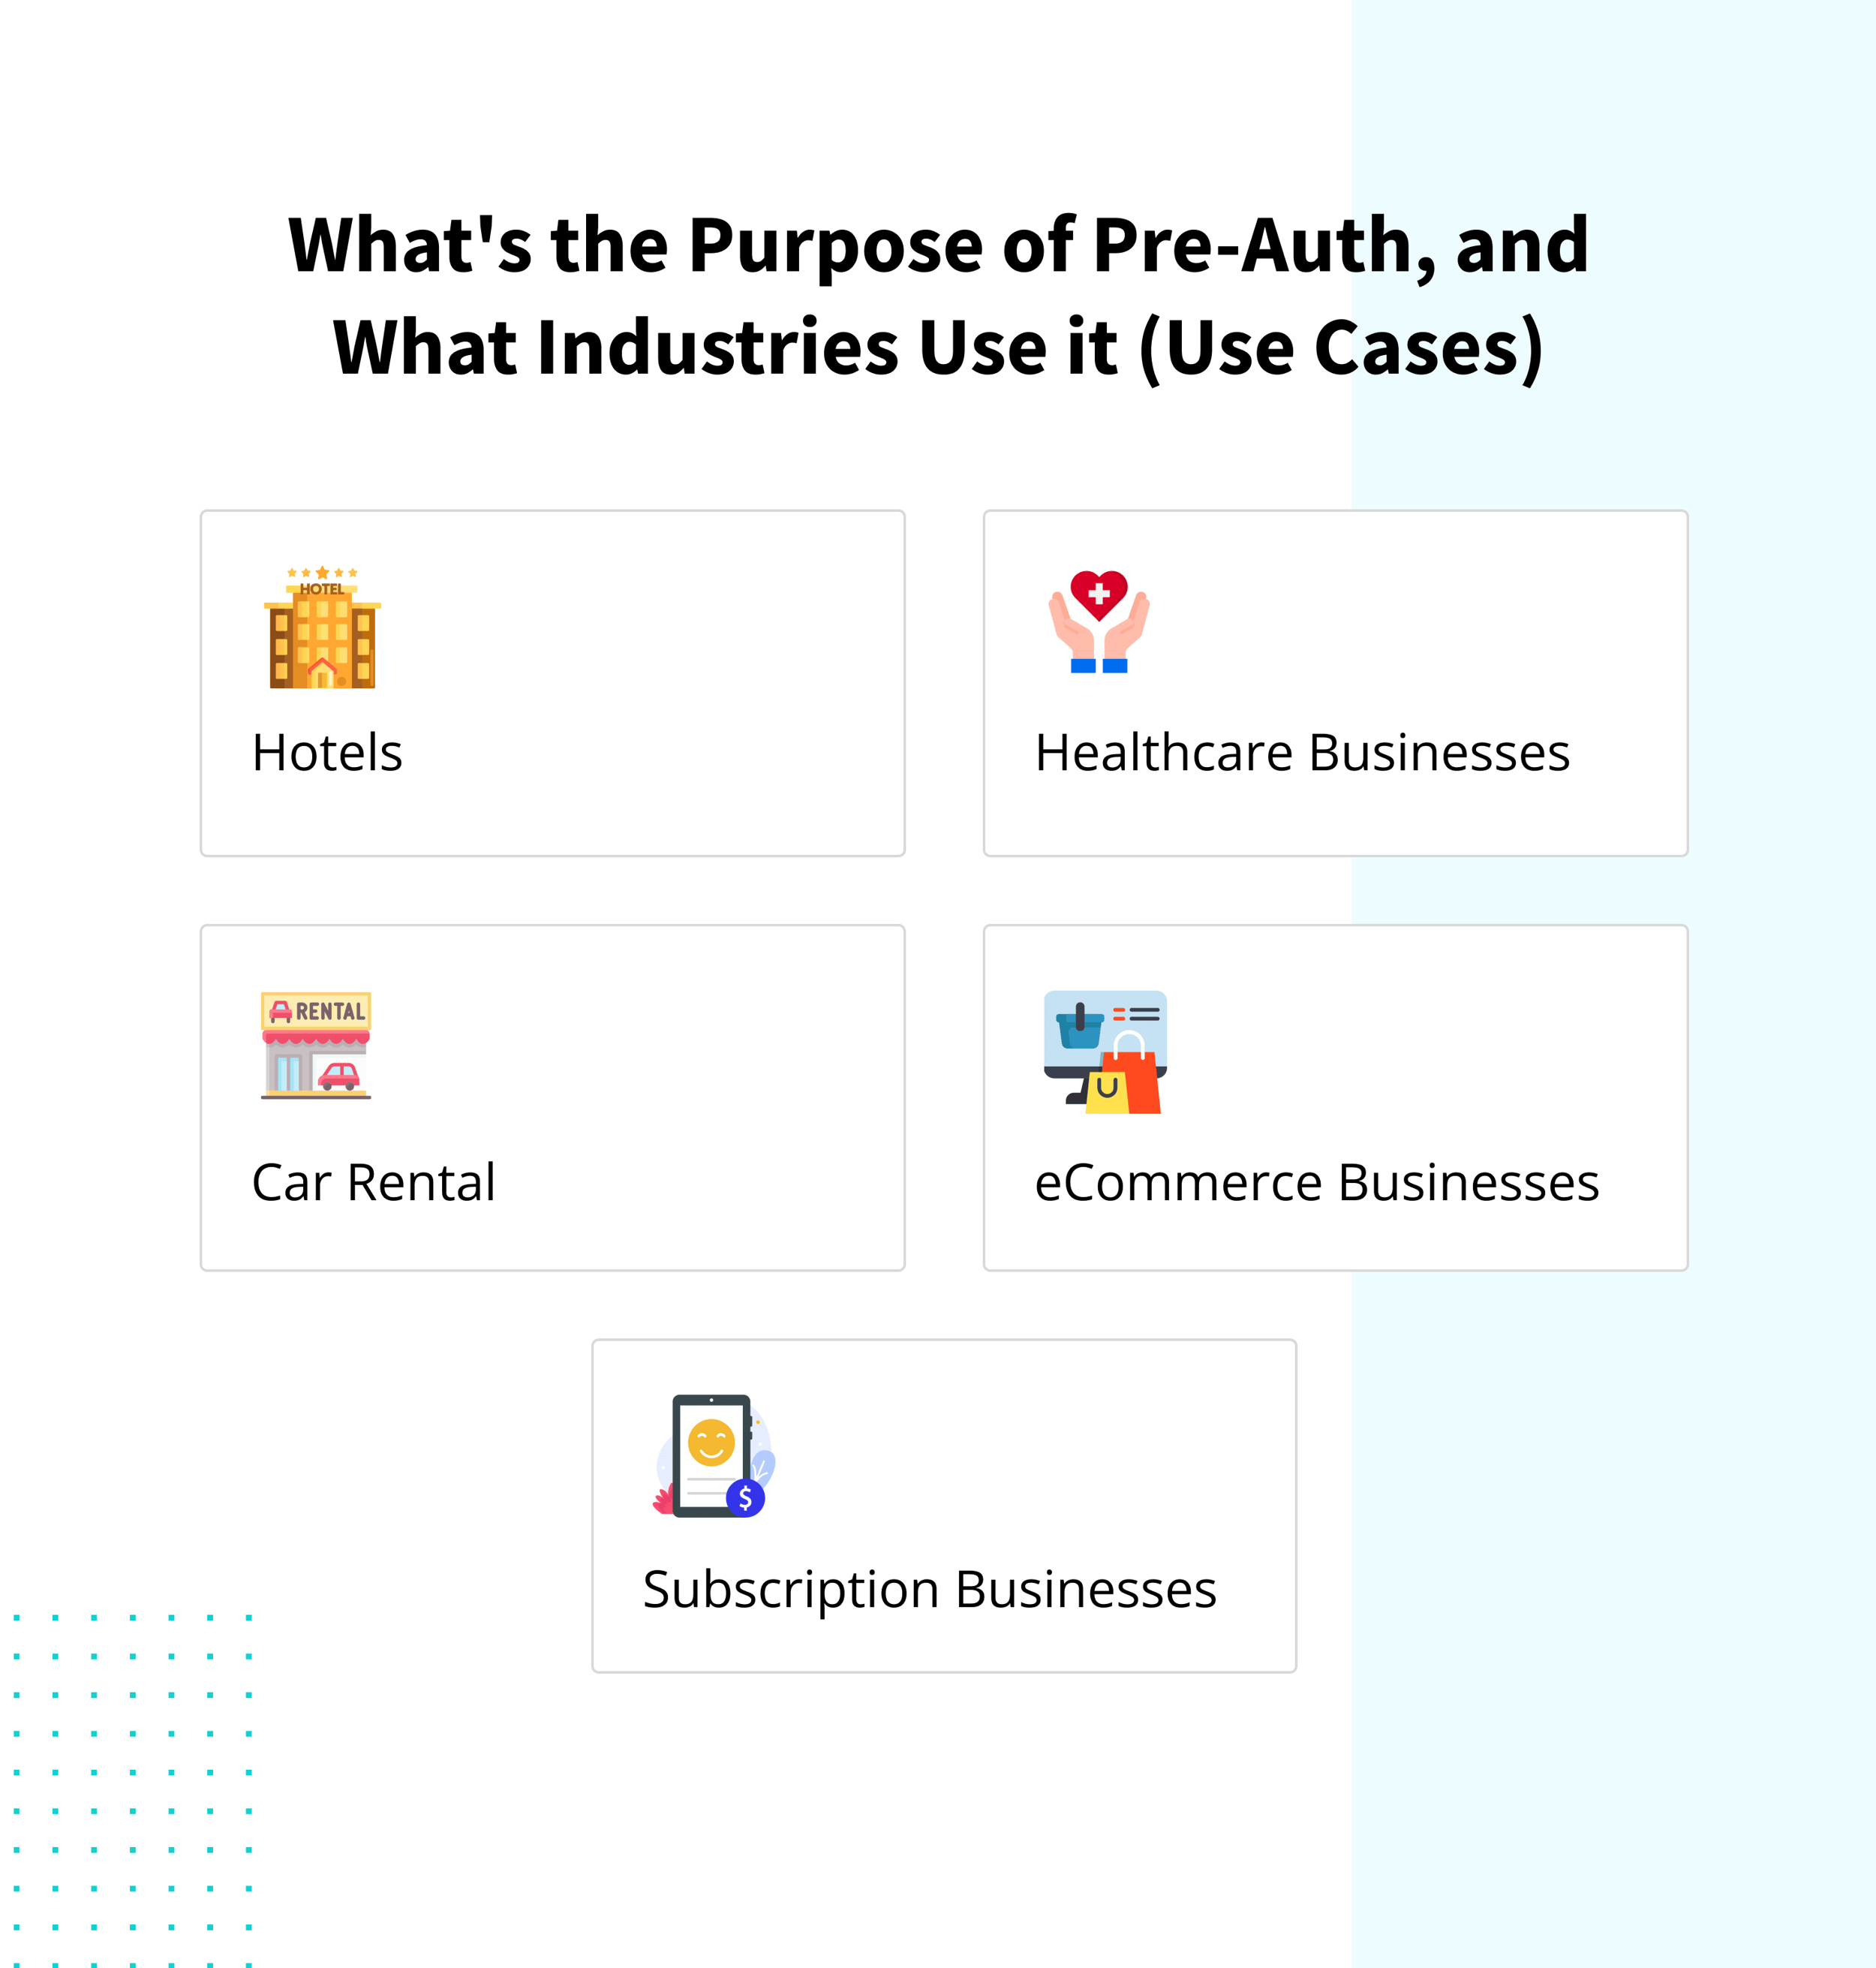 Whats the Purpose of Pre-Auth, and What Industries Use it?